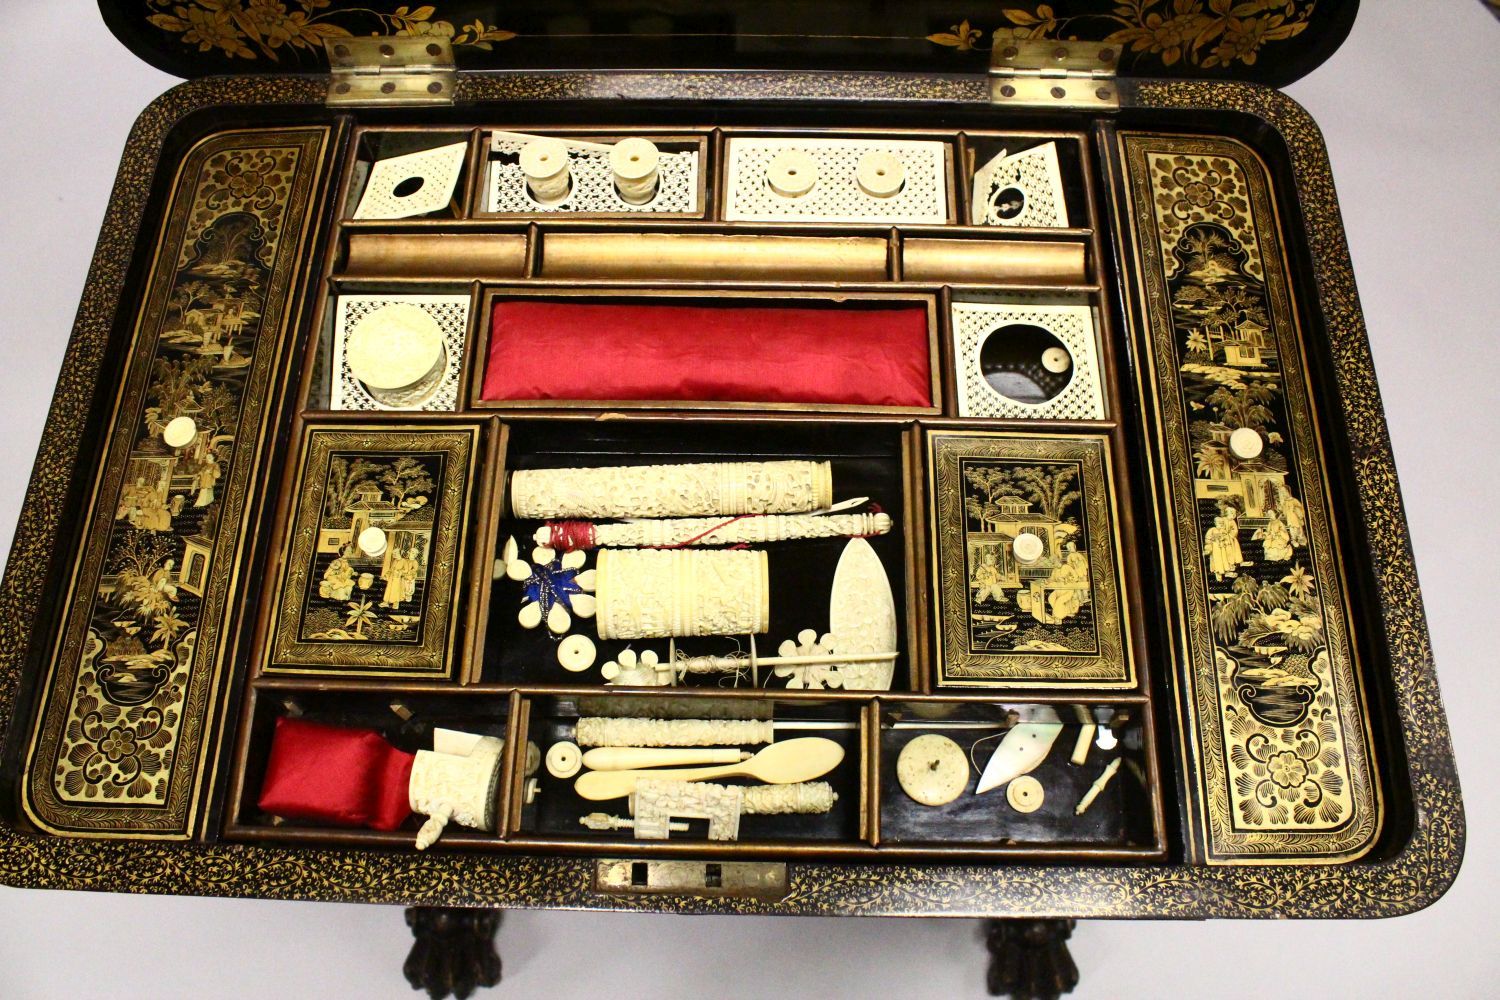 A CHINESE EXPORT BLACK LACQUER AND GILT DECORATED SEWING TABLE, with hinged lid opening to reveal - Image 2 of 5